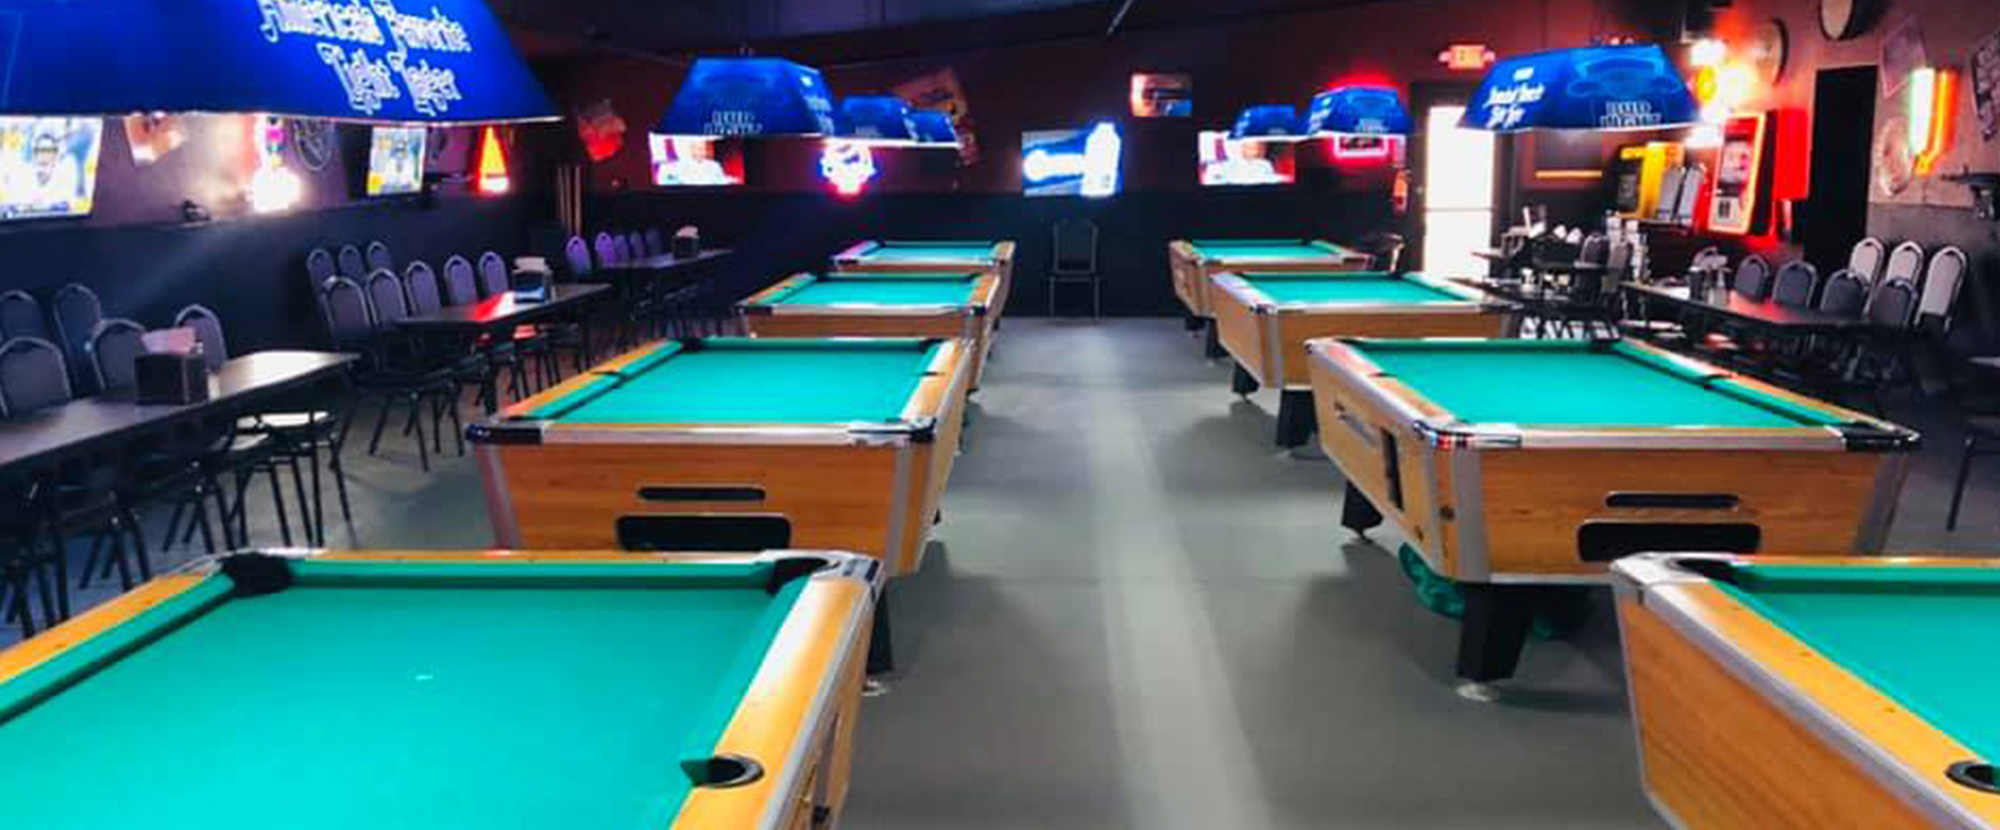 The Fort Saloon's Pool Hall is Now Open!